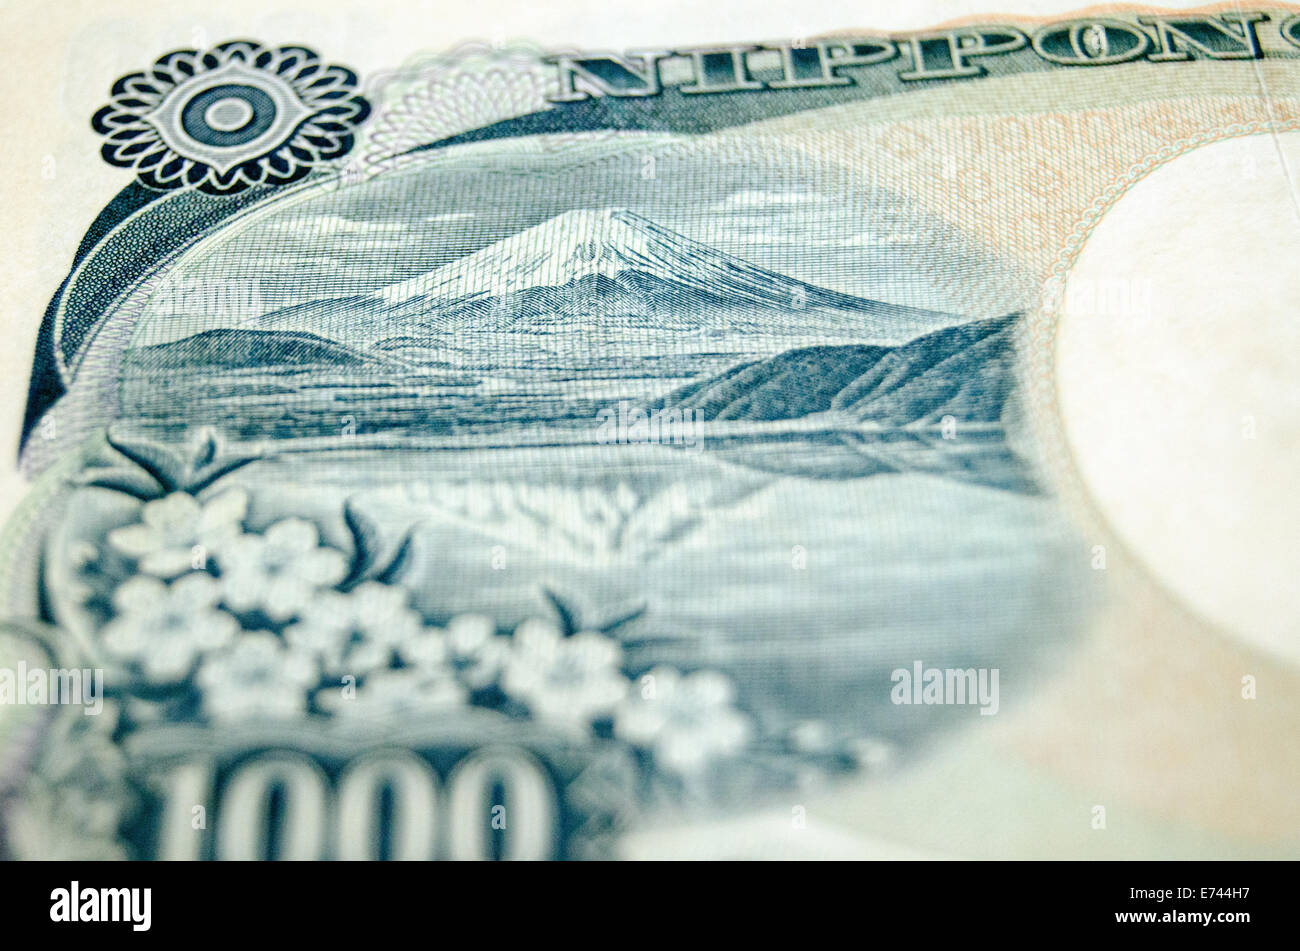 Detail of a 1000 Yen banknote with the Japanese landmark Mount Fuji on the reverse.  Used banknote photographed at an angle. Stock Photo